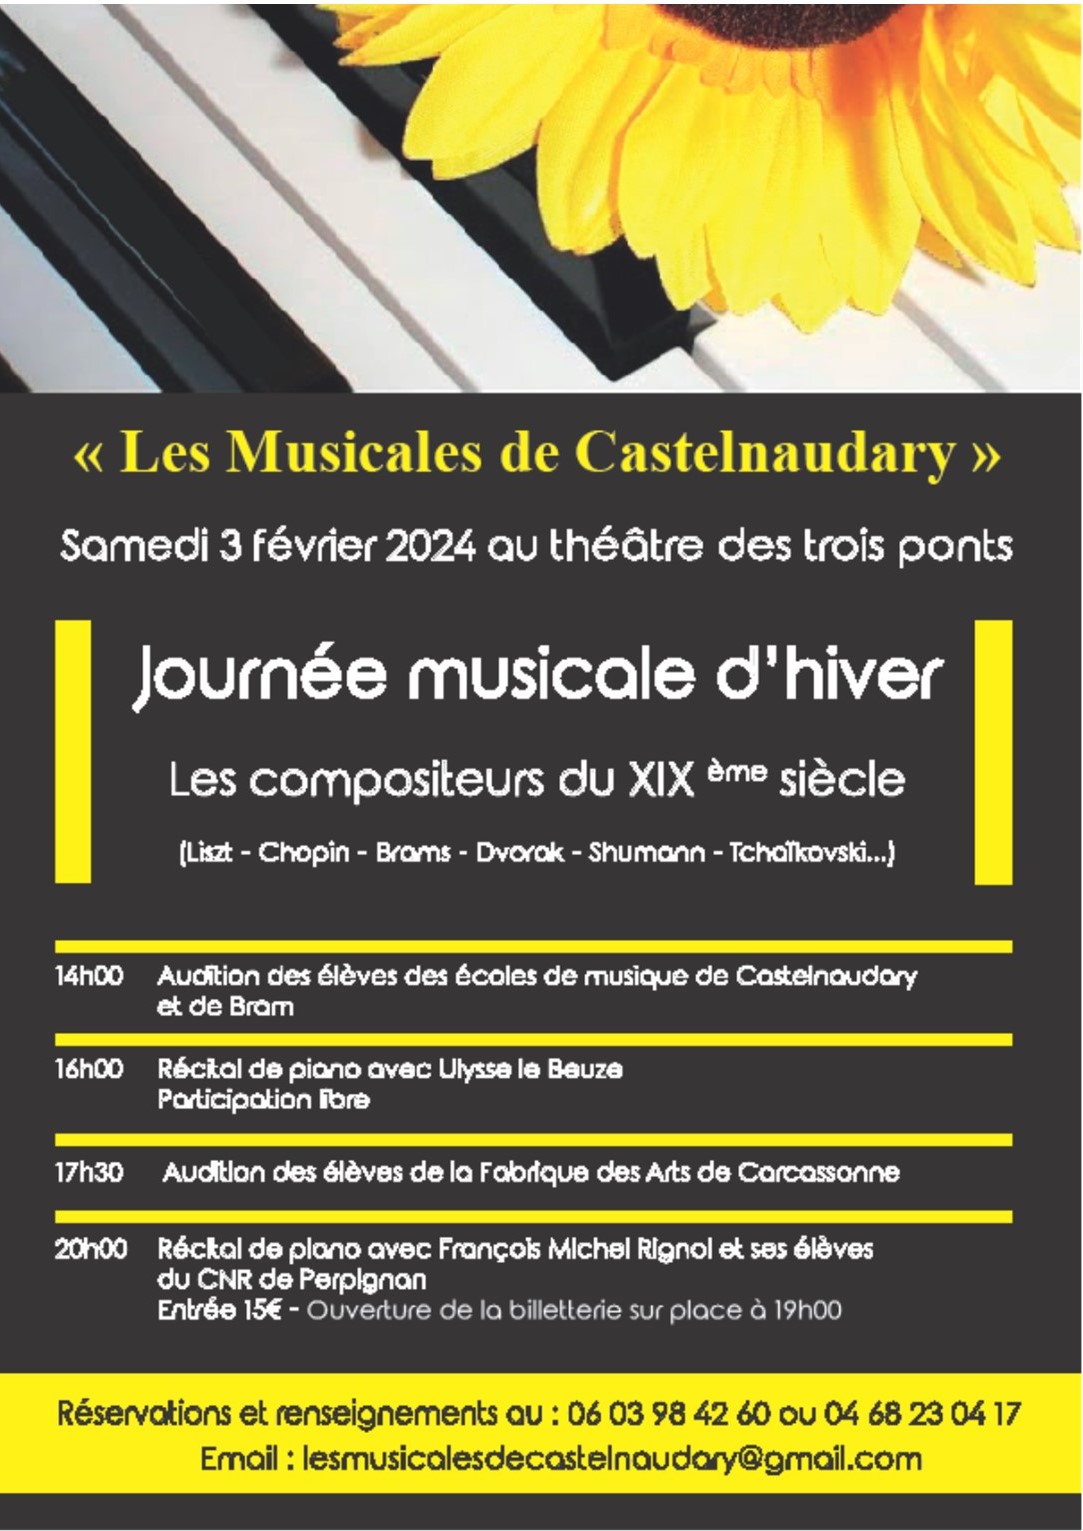 JOURNEE MUSICALES D'HIVER